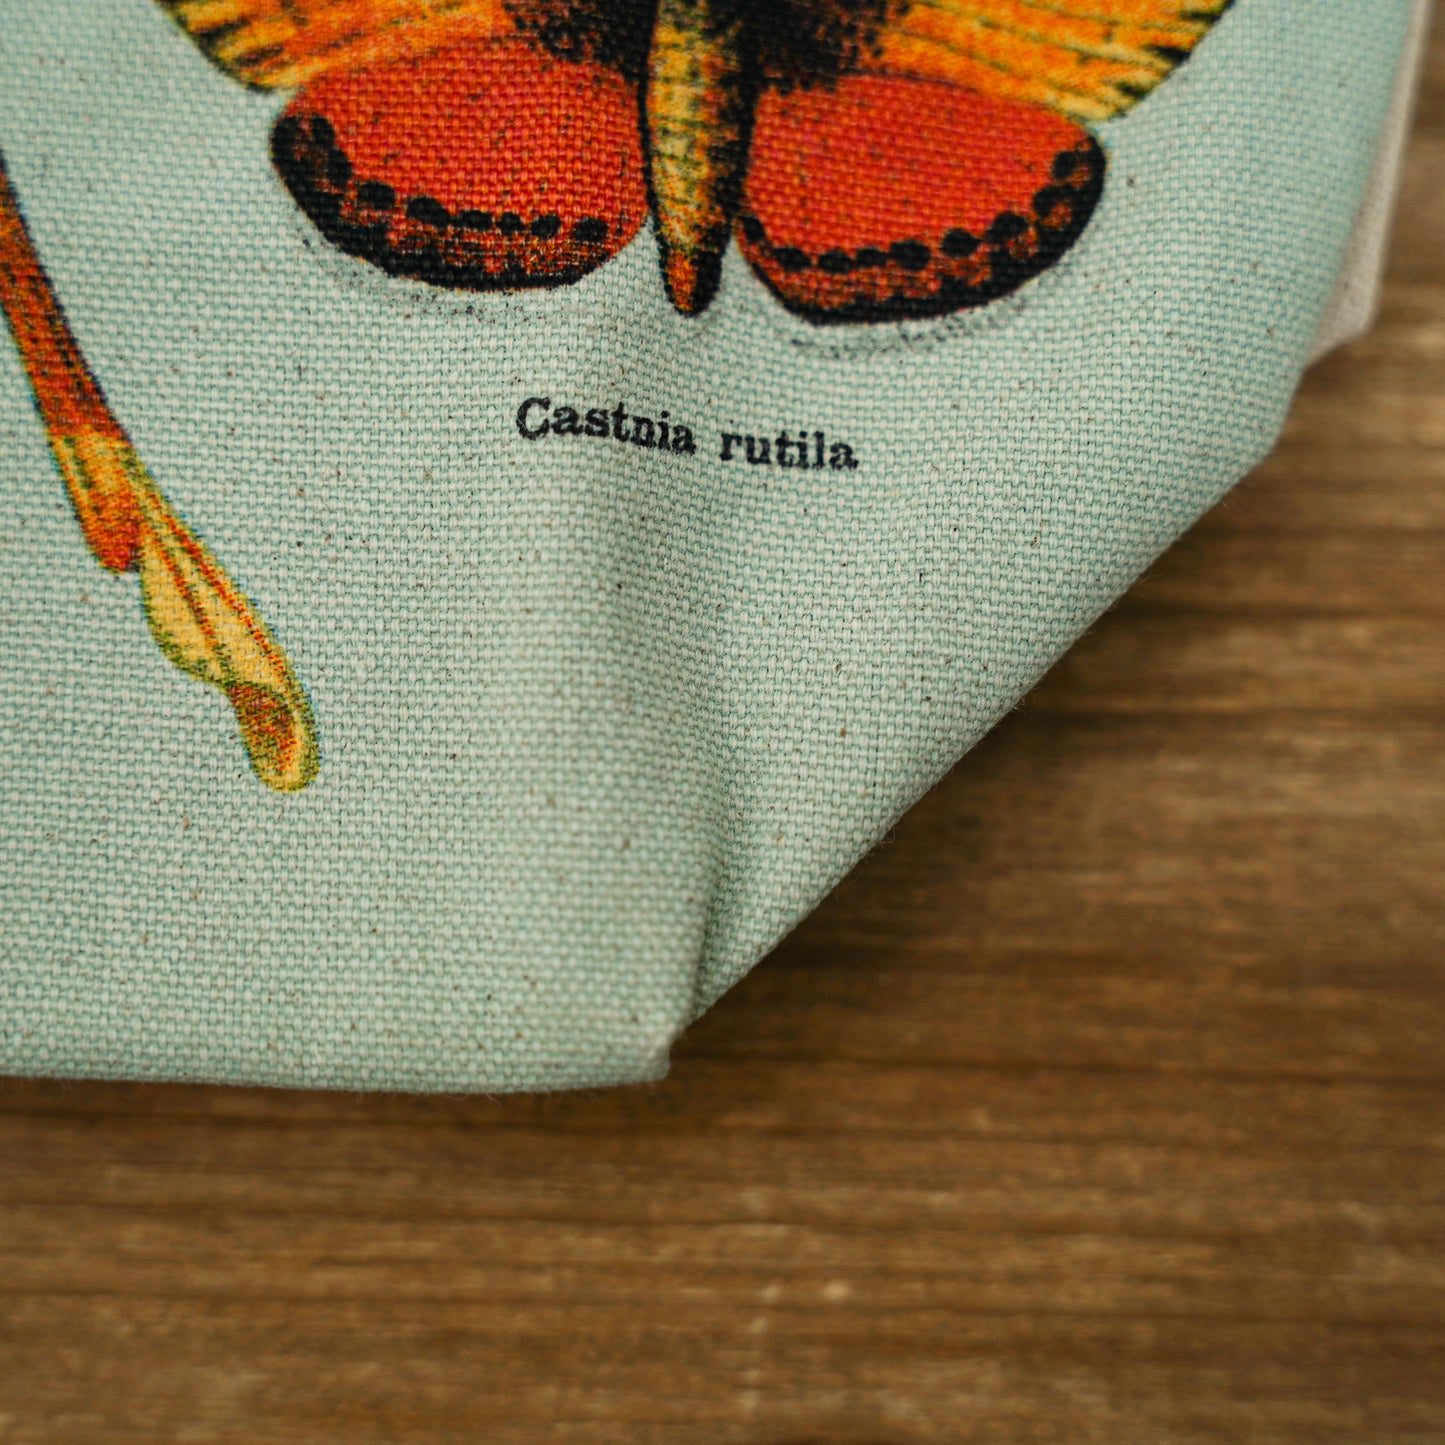 Vintage Butterfly Tote Bag